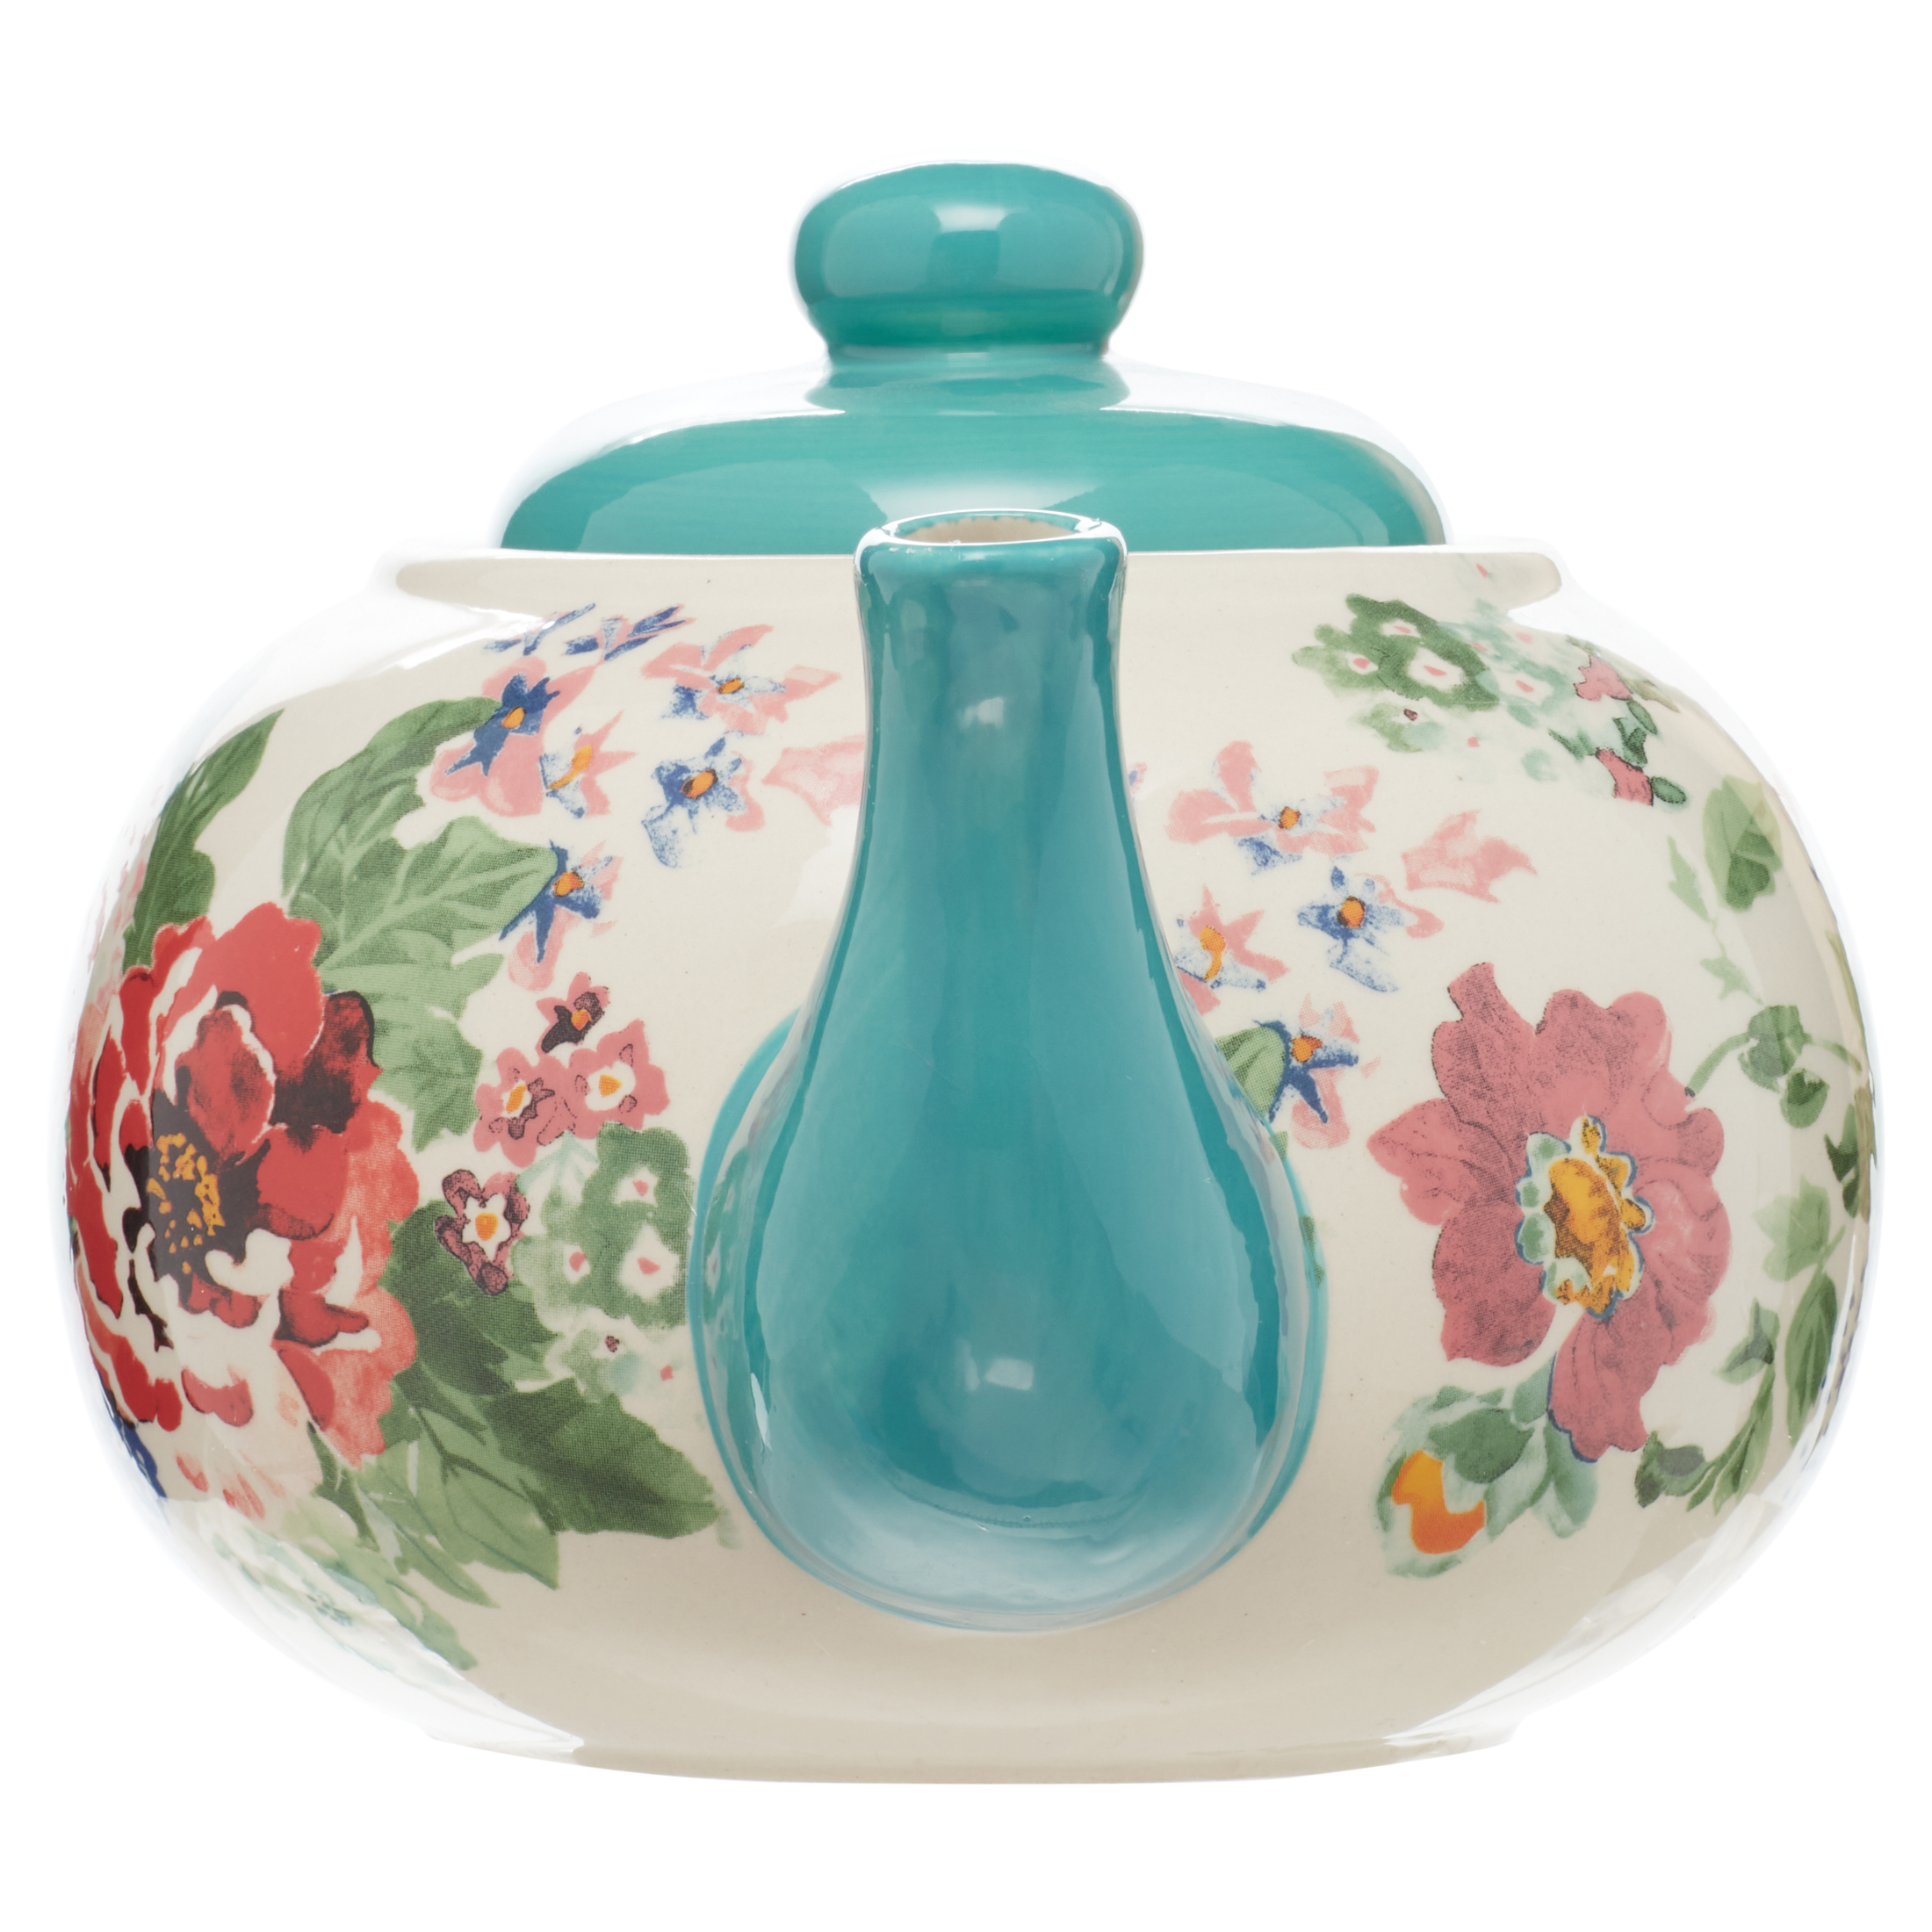 The Pioneer Woman Country Garden Teapot - image 5 of 10